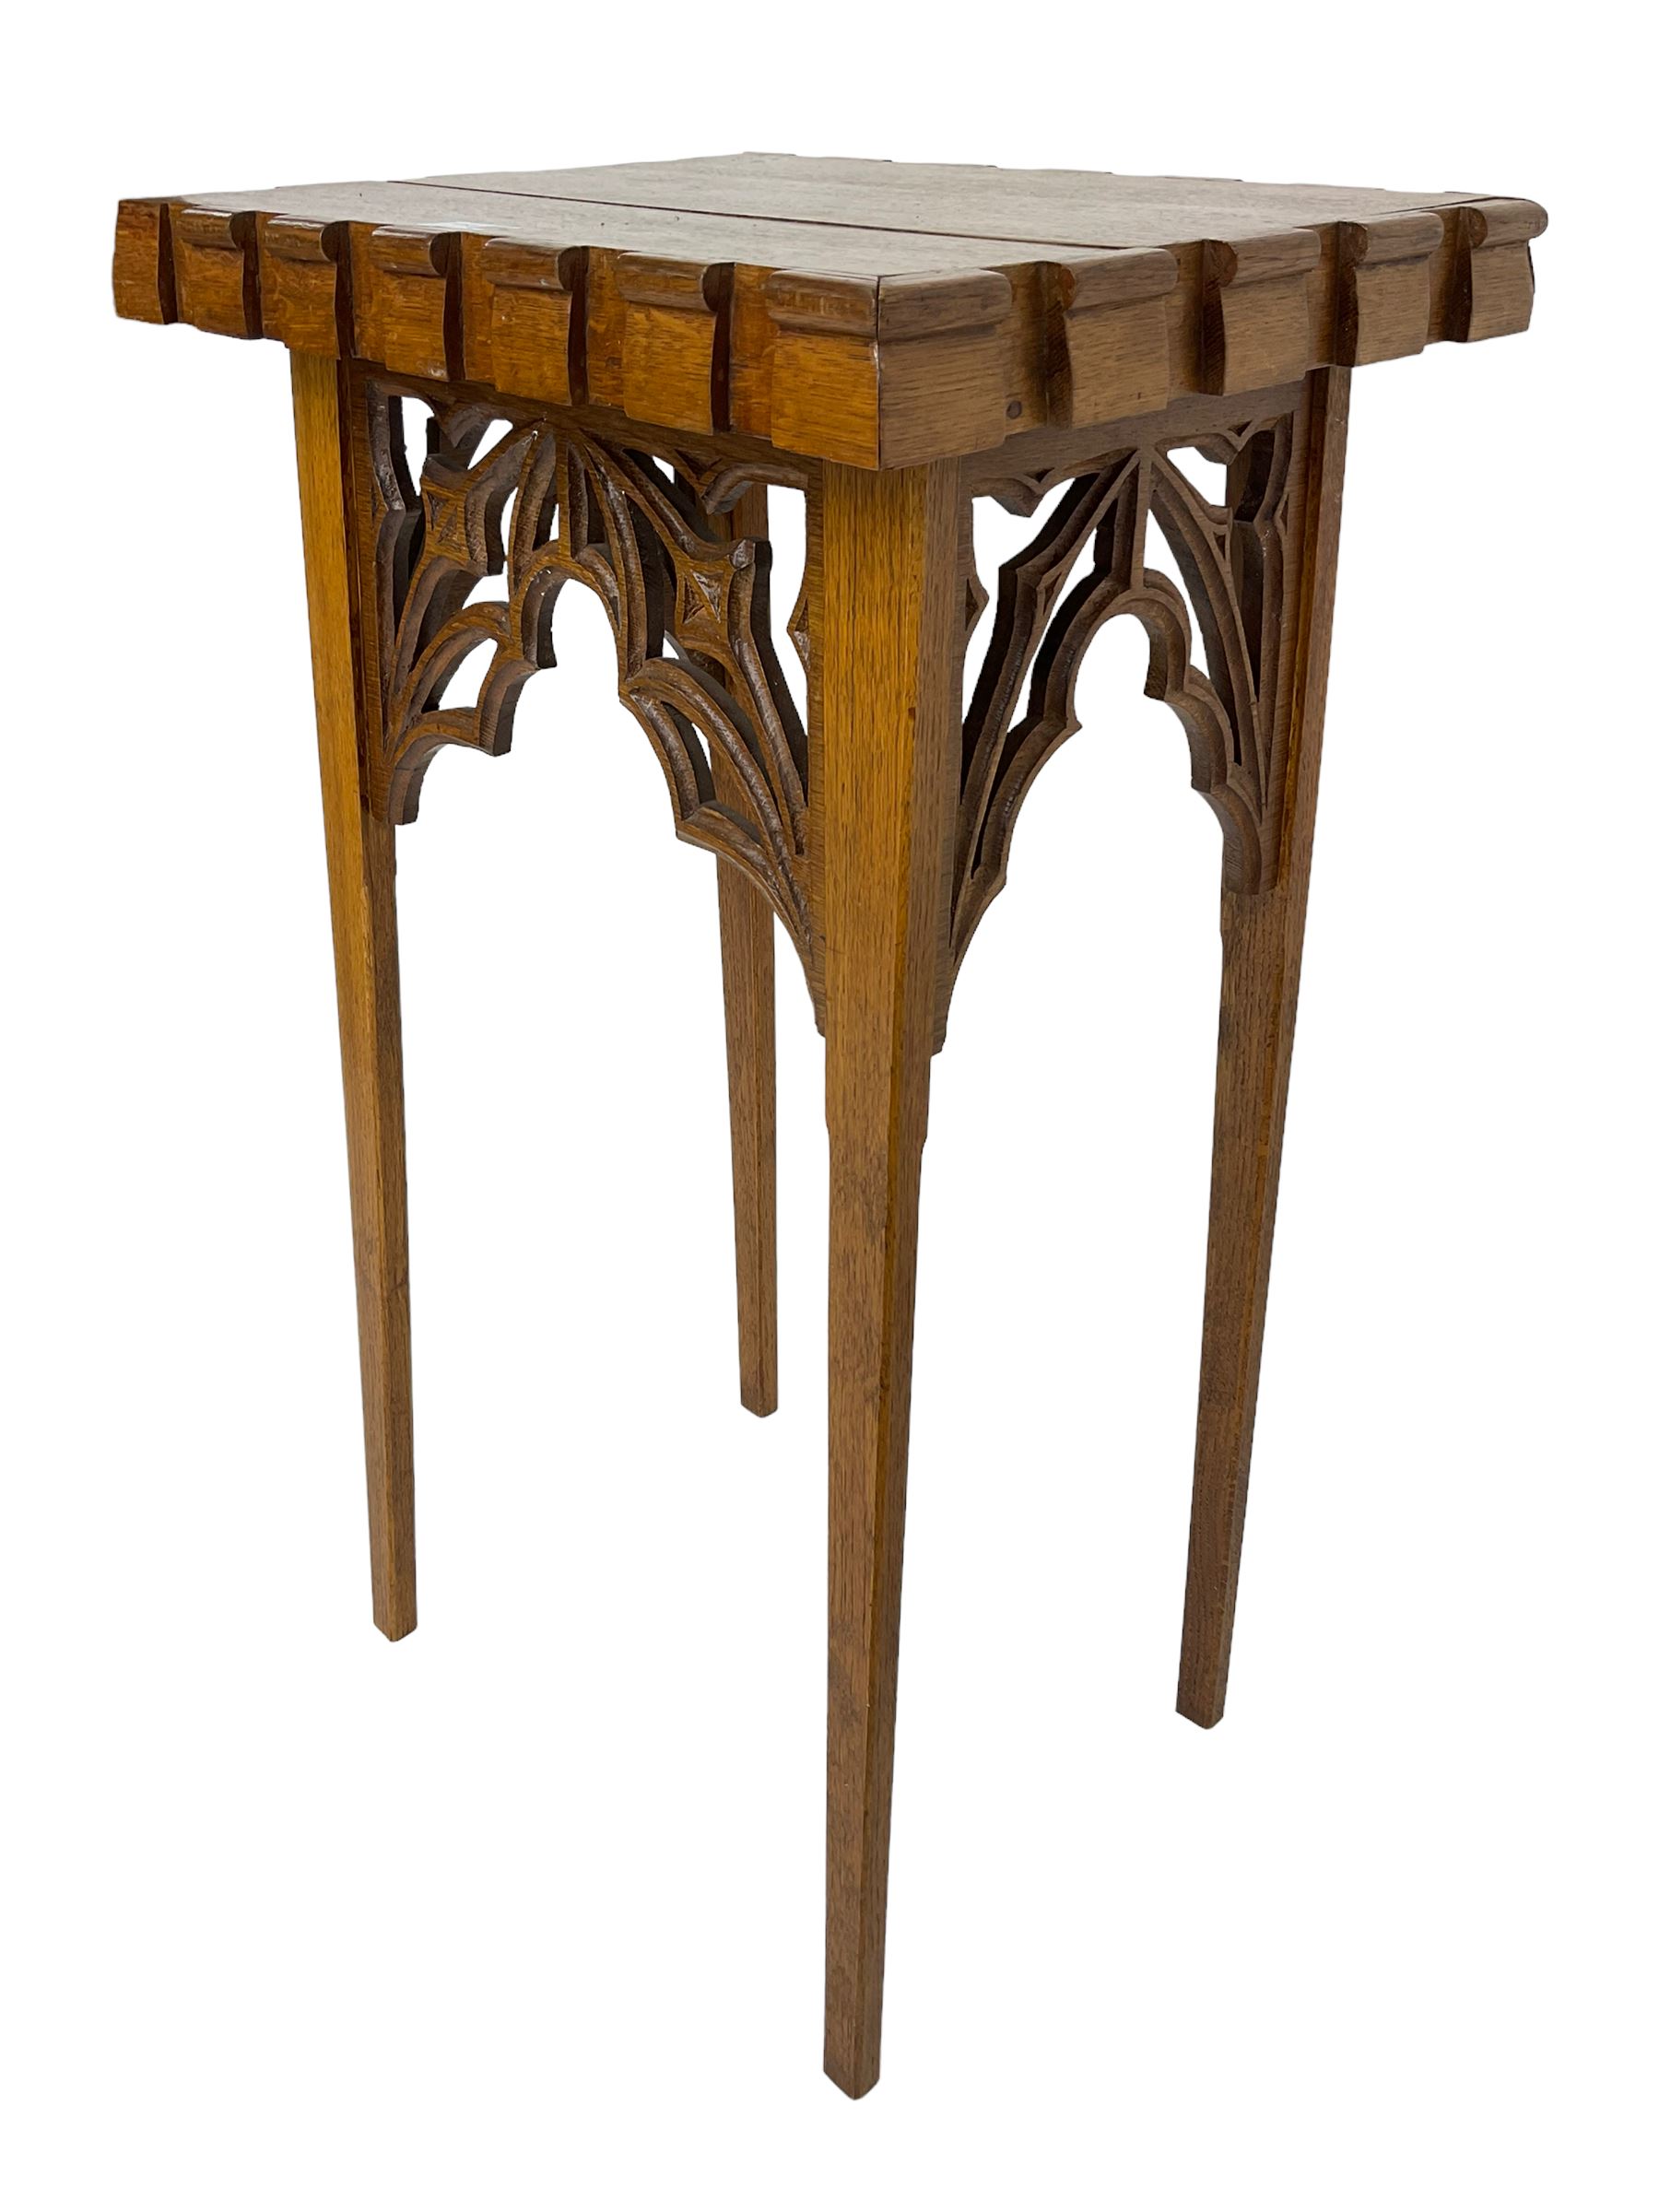 20th century ecclesiastical Gothic style oak stand - Image 2 of 6